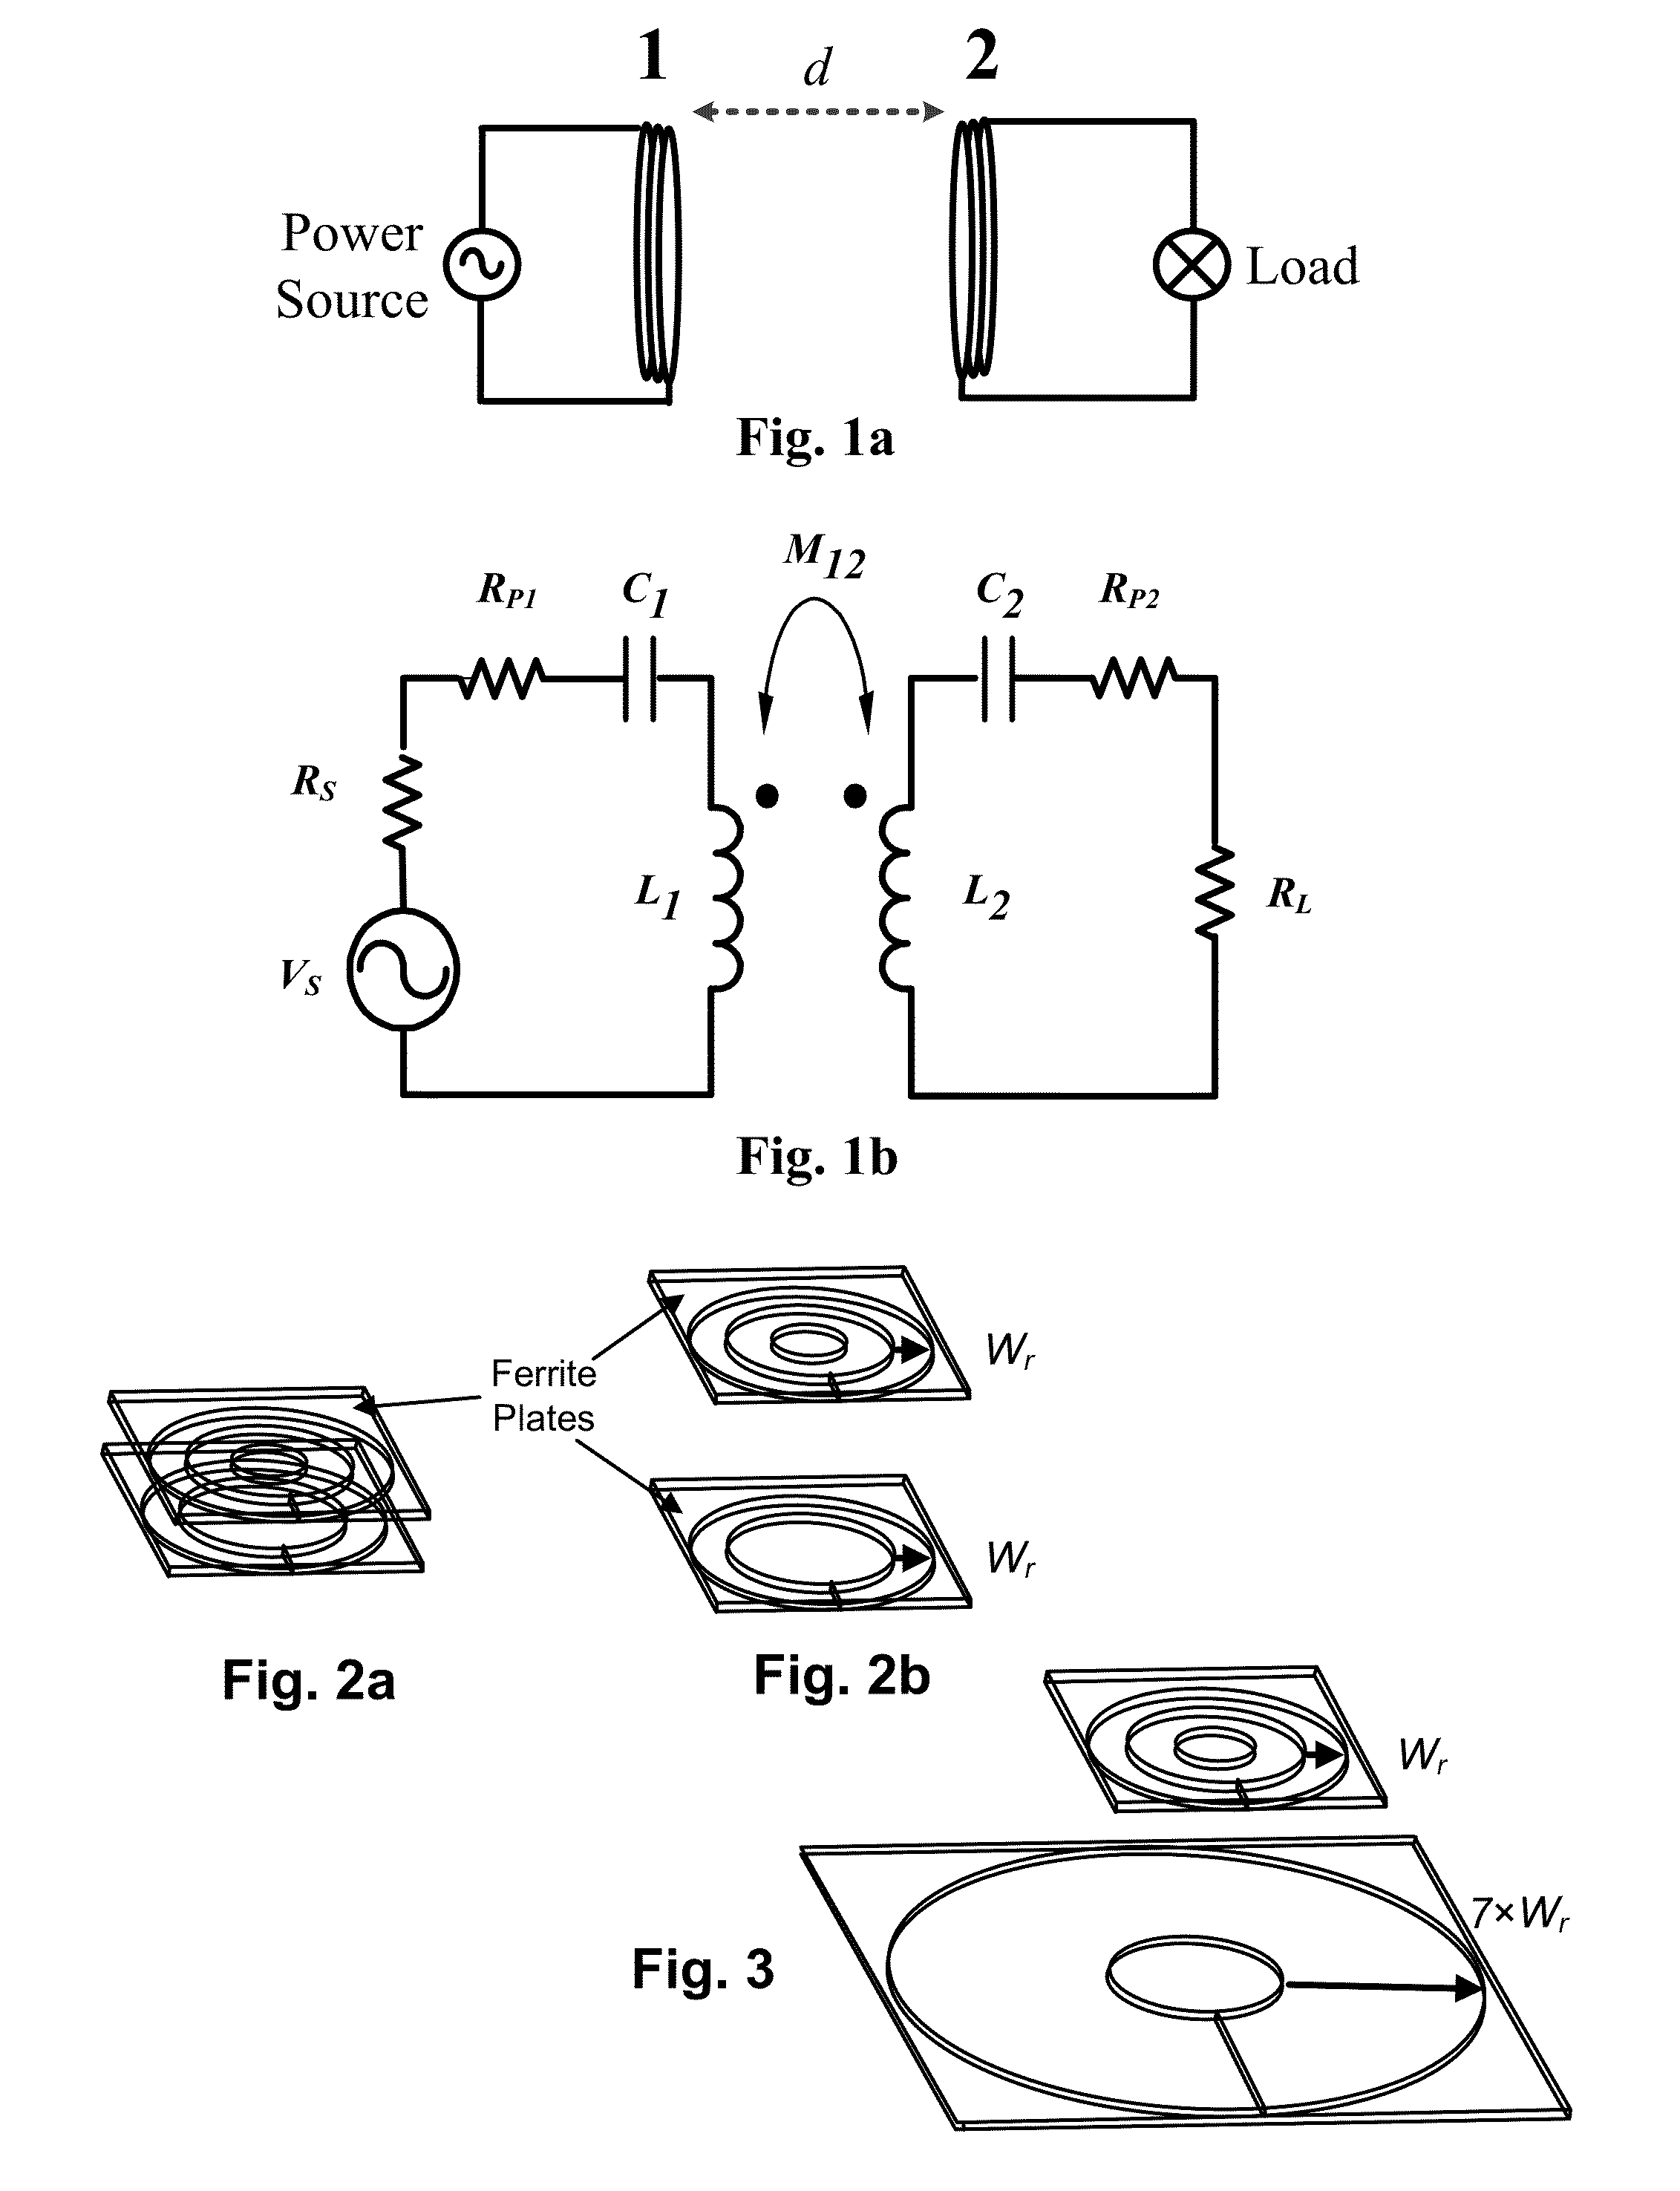 Inductive power transfer using a relay coil